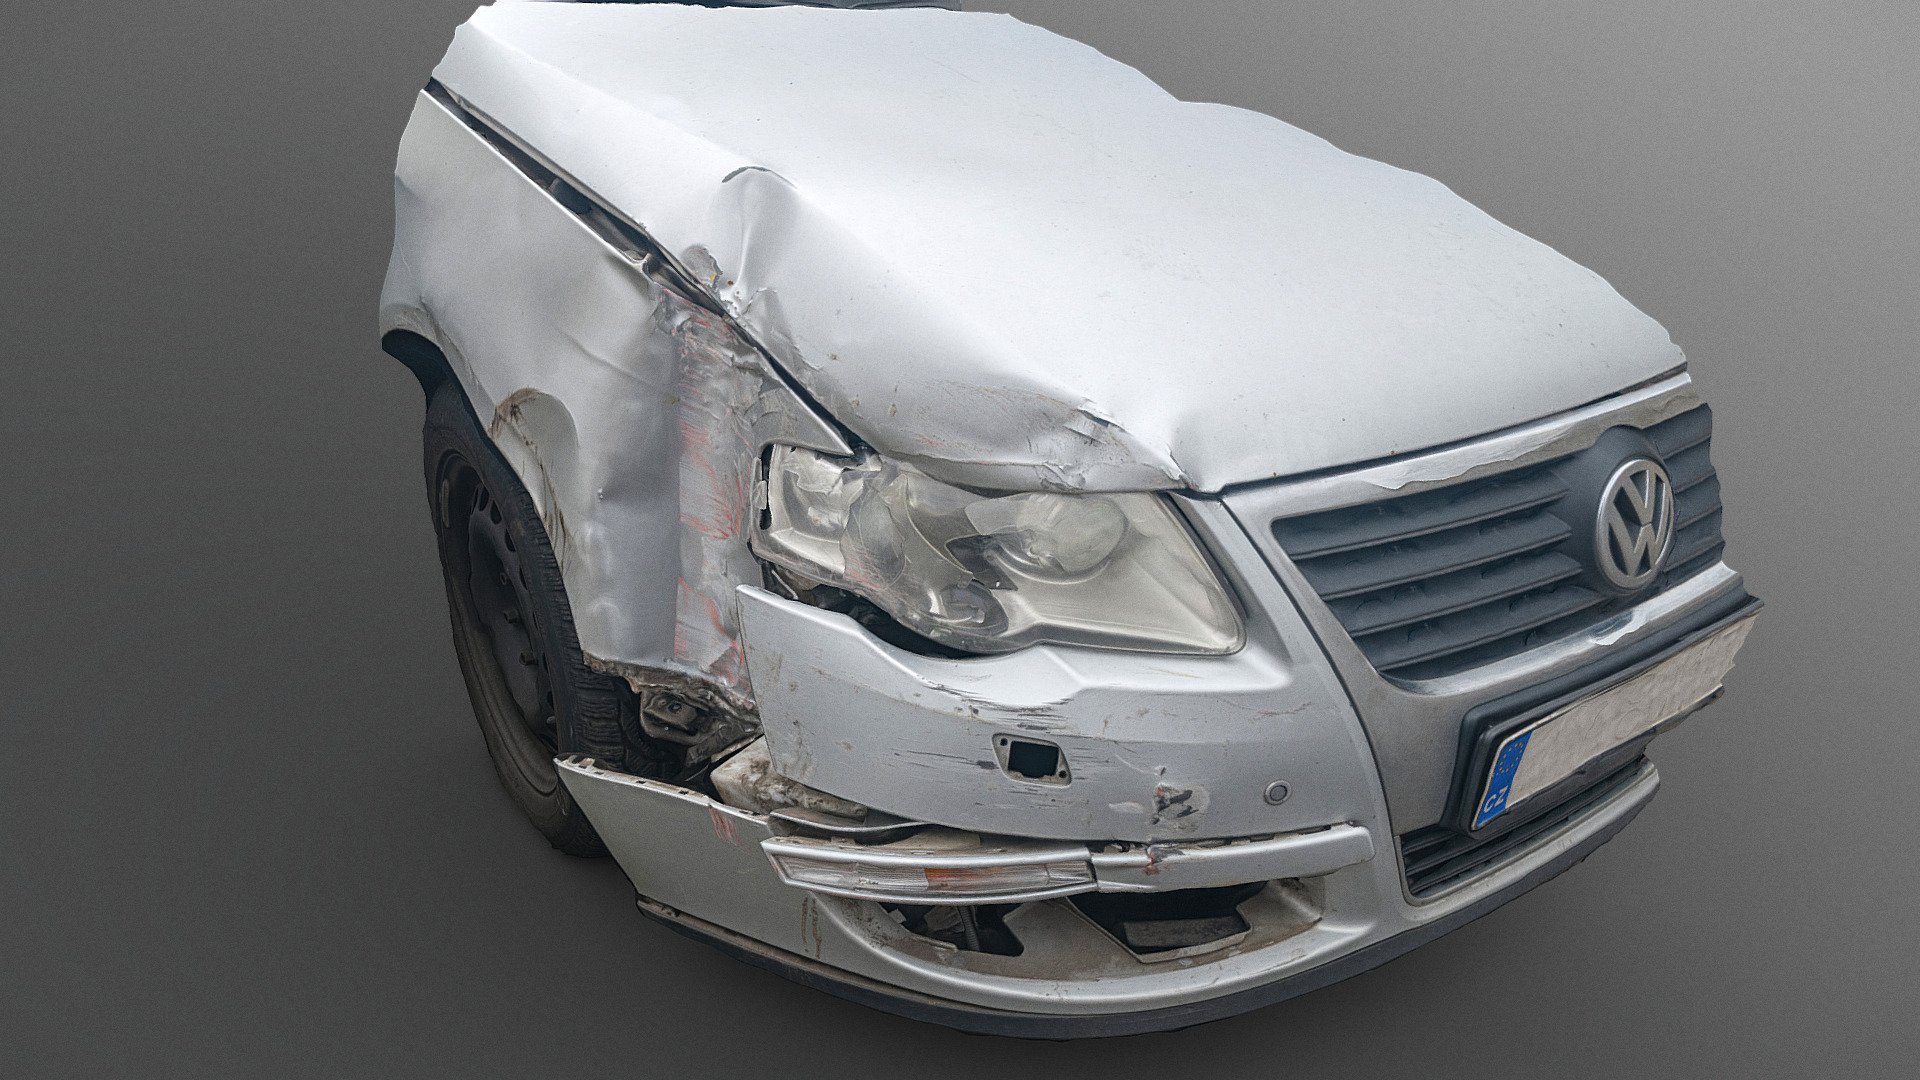 Test shooting of shiny silver crashed Car, DSLR + simple CPL filter

Created in RealityCapture by Capturing Reality

photogrammetry scan (150x24mp), 2x8k textures - Car crash CPL test - Download Free 3D model by matousekfoto 3d model